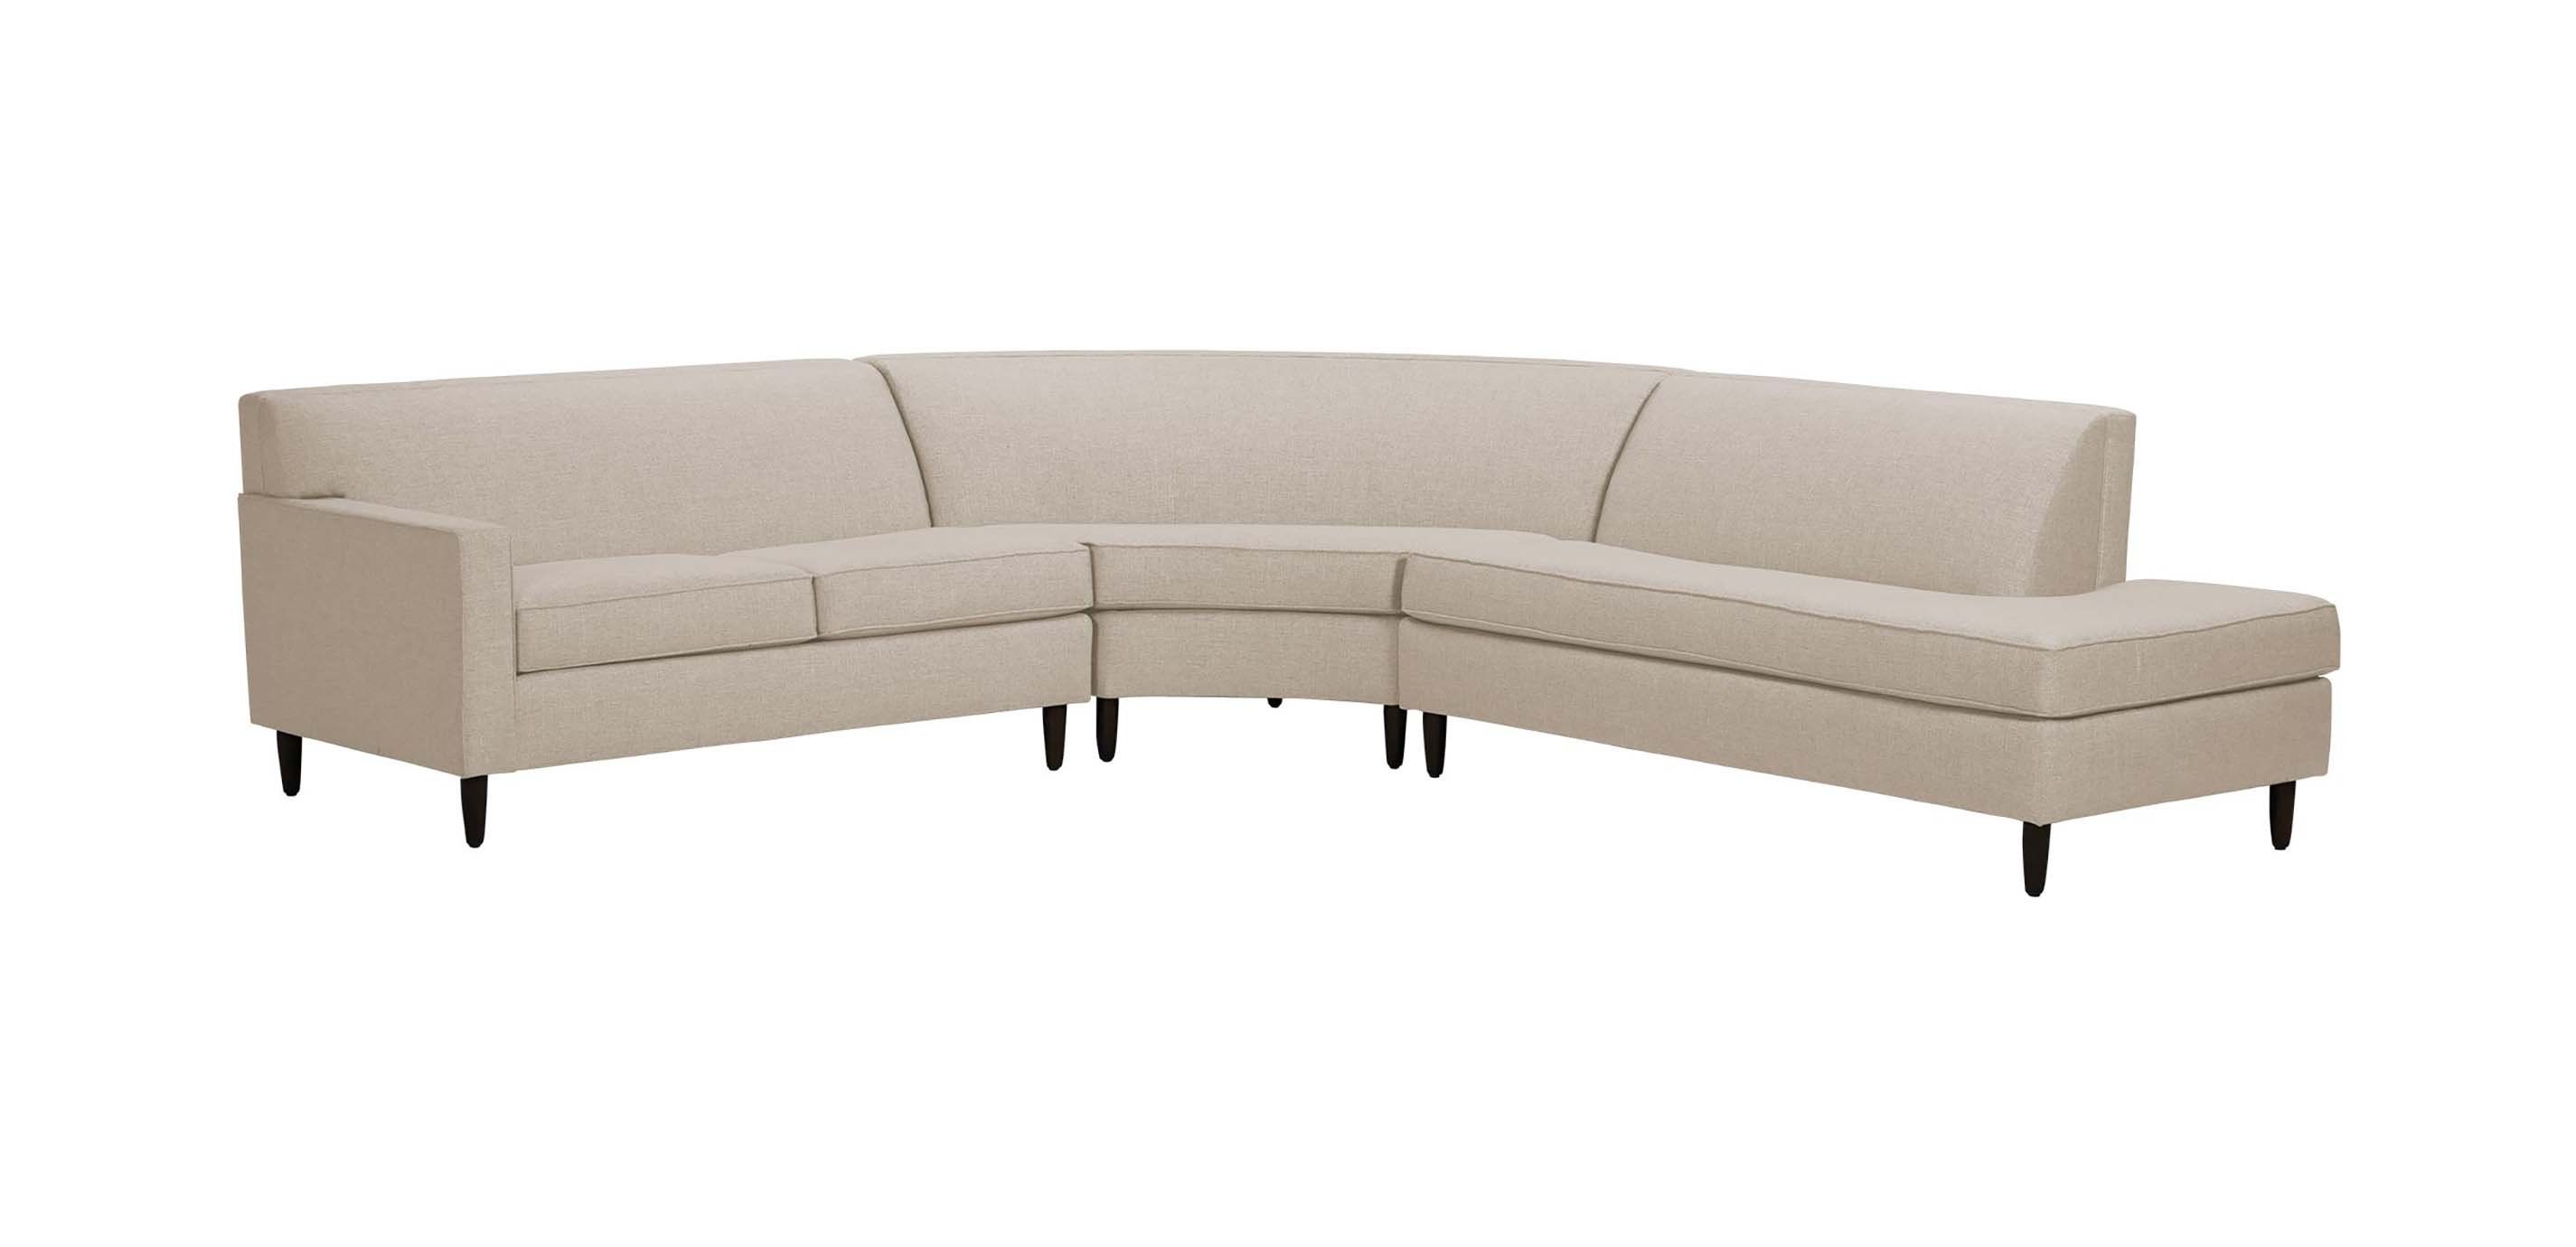 Marcus 3 Piece Sectional | Ethan Allen | Ethan Allen Intended For 3 Piece Curved Sectional Set (View 14 of 15)